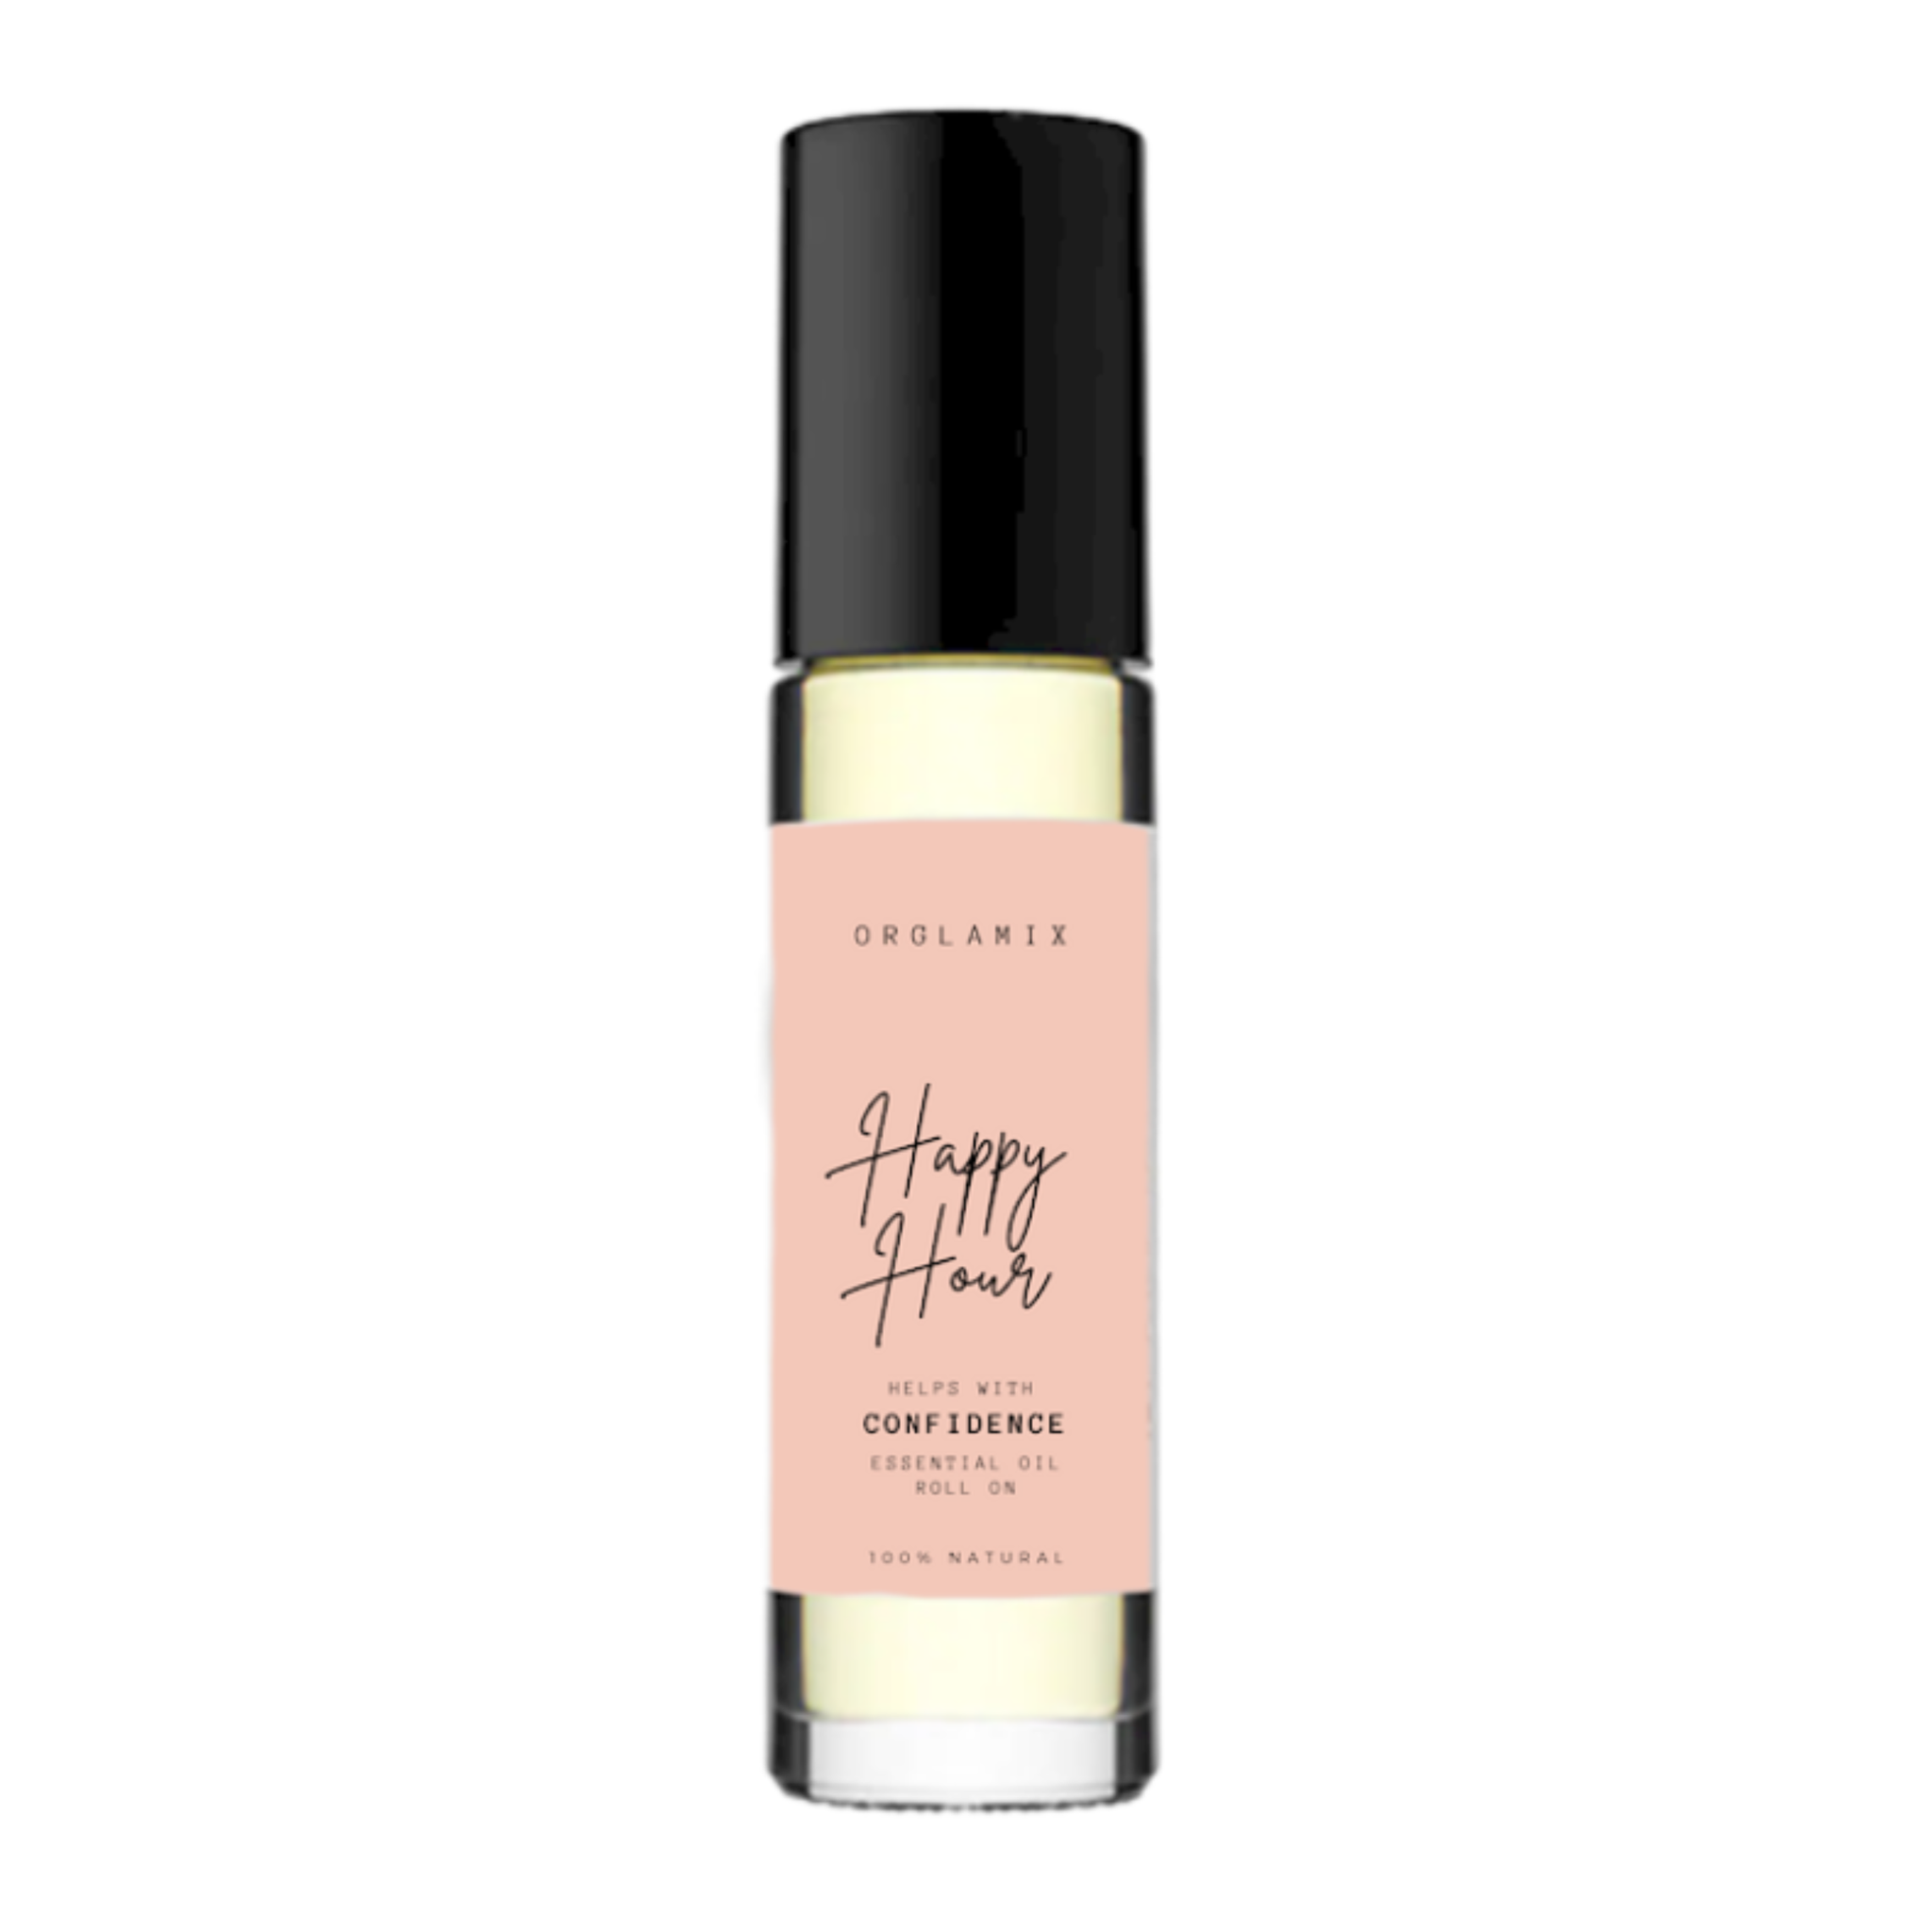 Orglamix - Happy Hour Essential Oil Roll-On